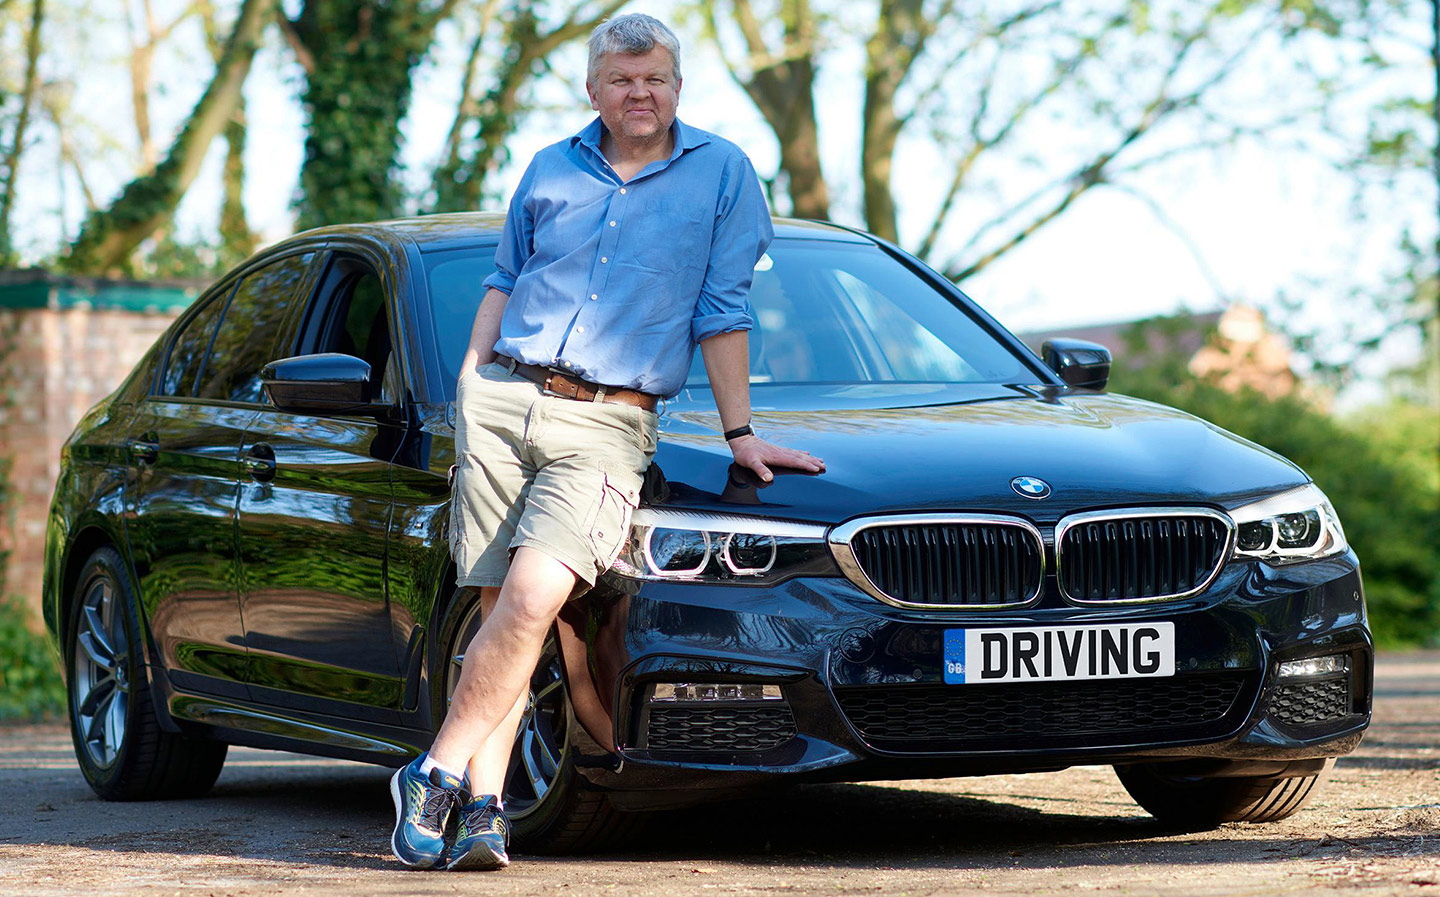 Me and My Motor: Adrian Chiles, radio and TV presenter